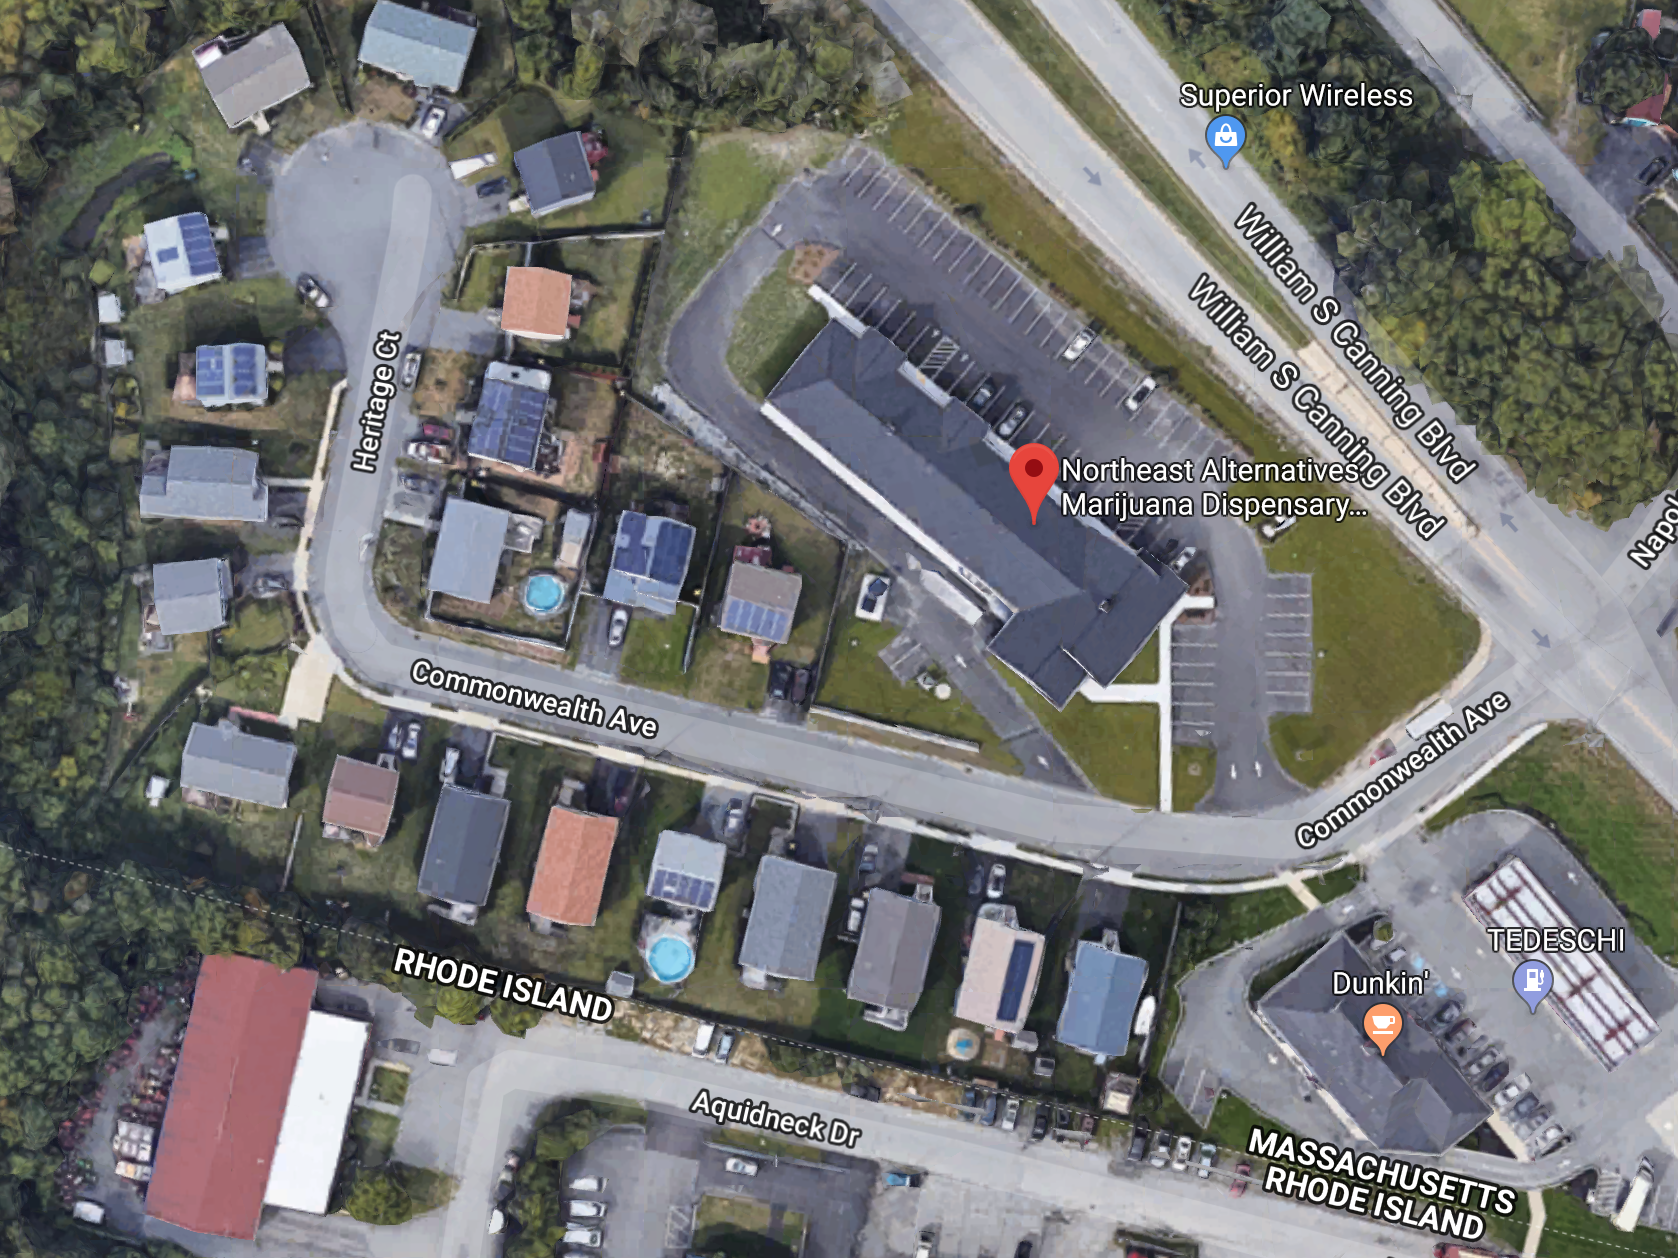 Northeast Alternatives began operating as a recreational pot facility in January 2019. The facility shares a street with over 20 residential homes. (Image via Google Maps)